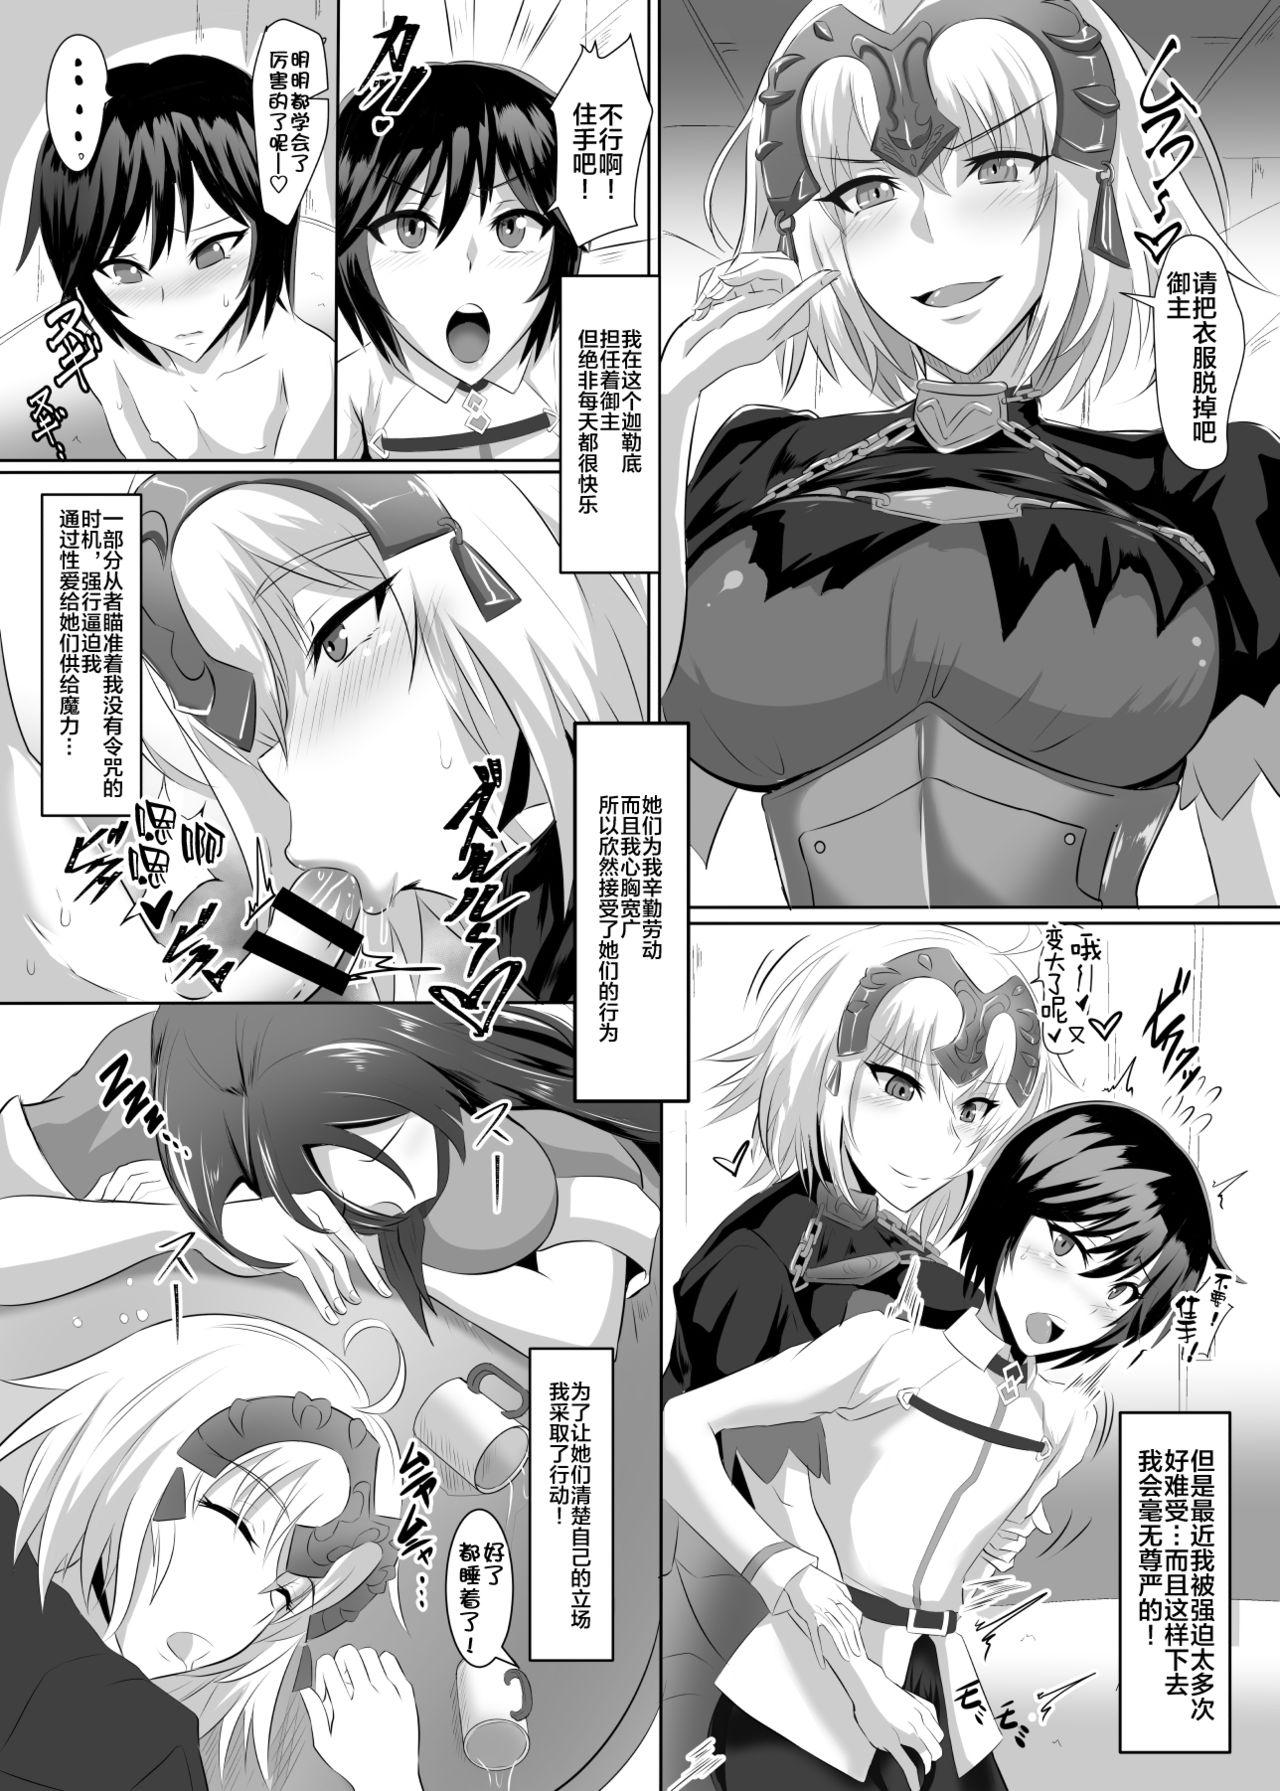 Old Vs Young Gehenna 7 - Fate grand order Spanish - Page 4